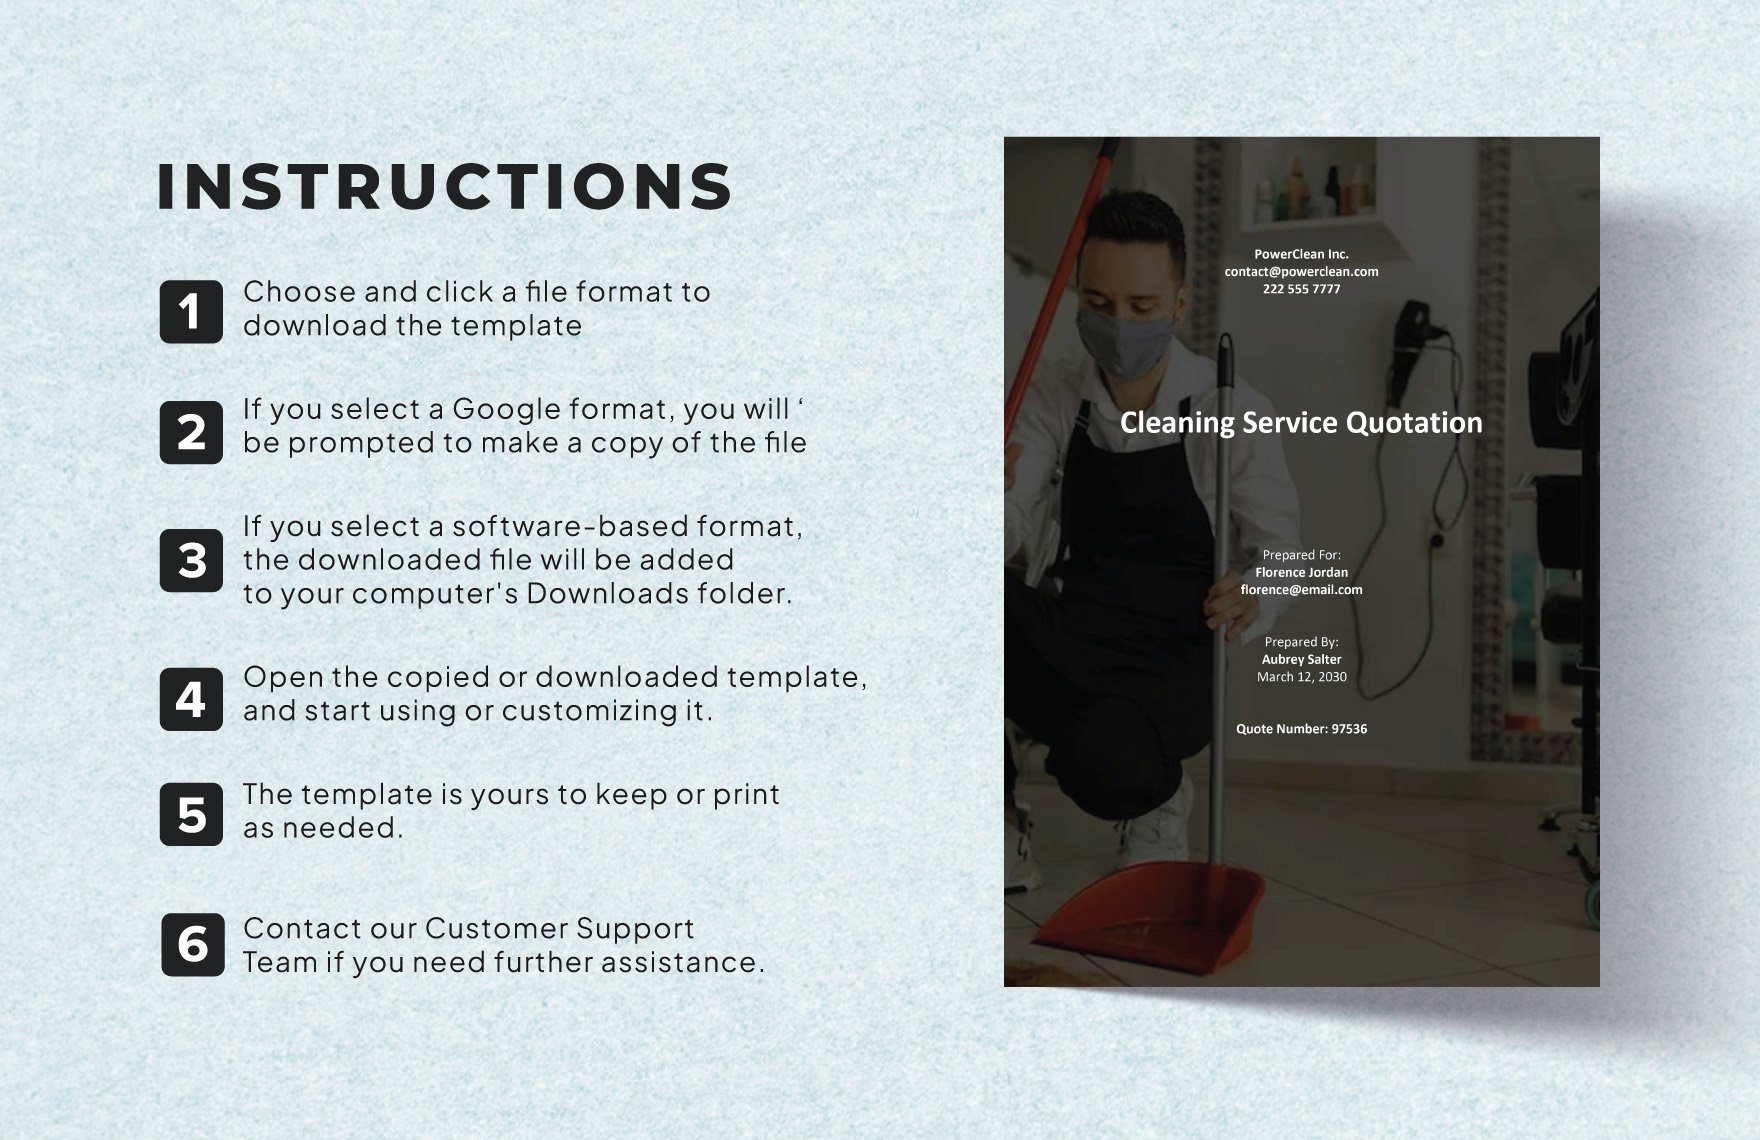 Request Quotation for Cleaning Services Template